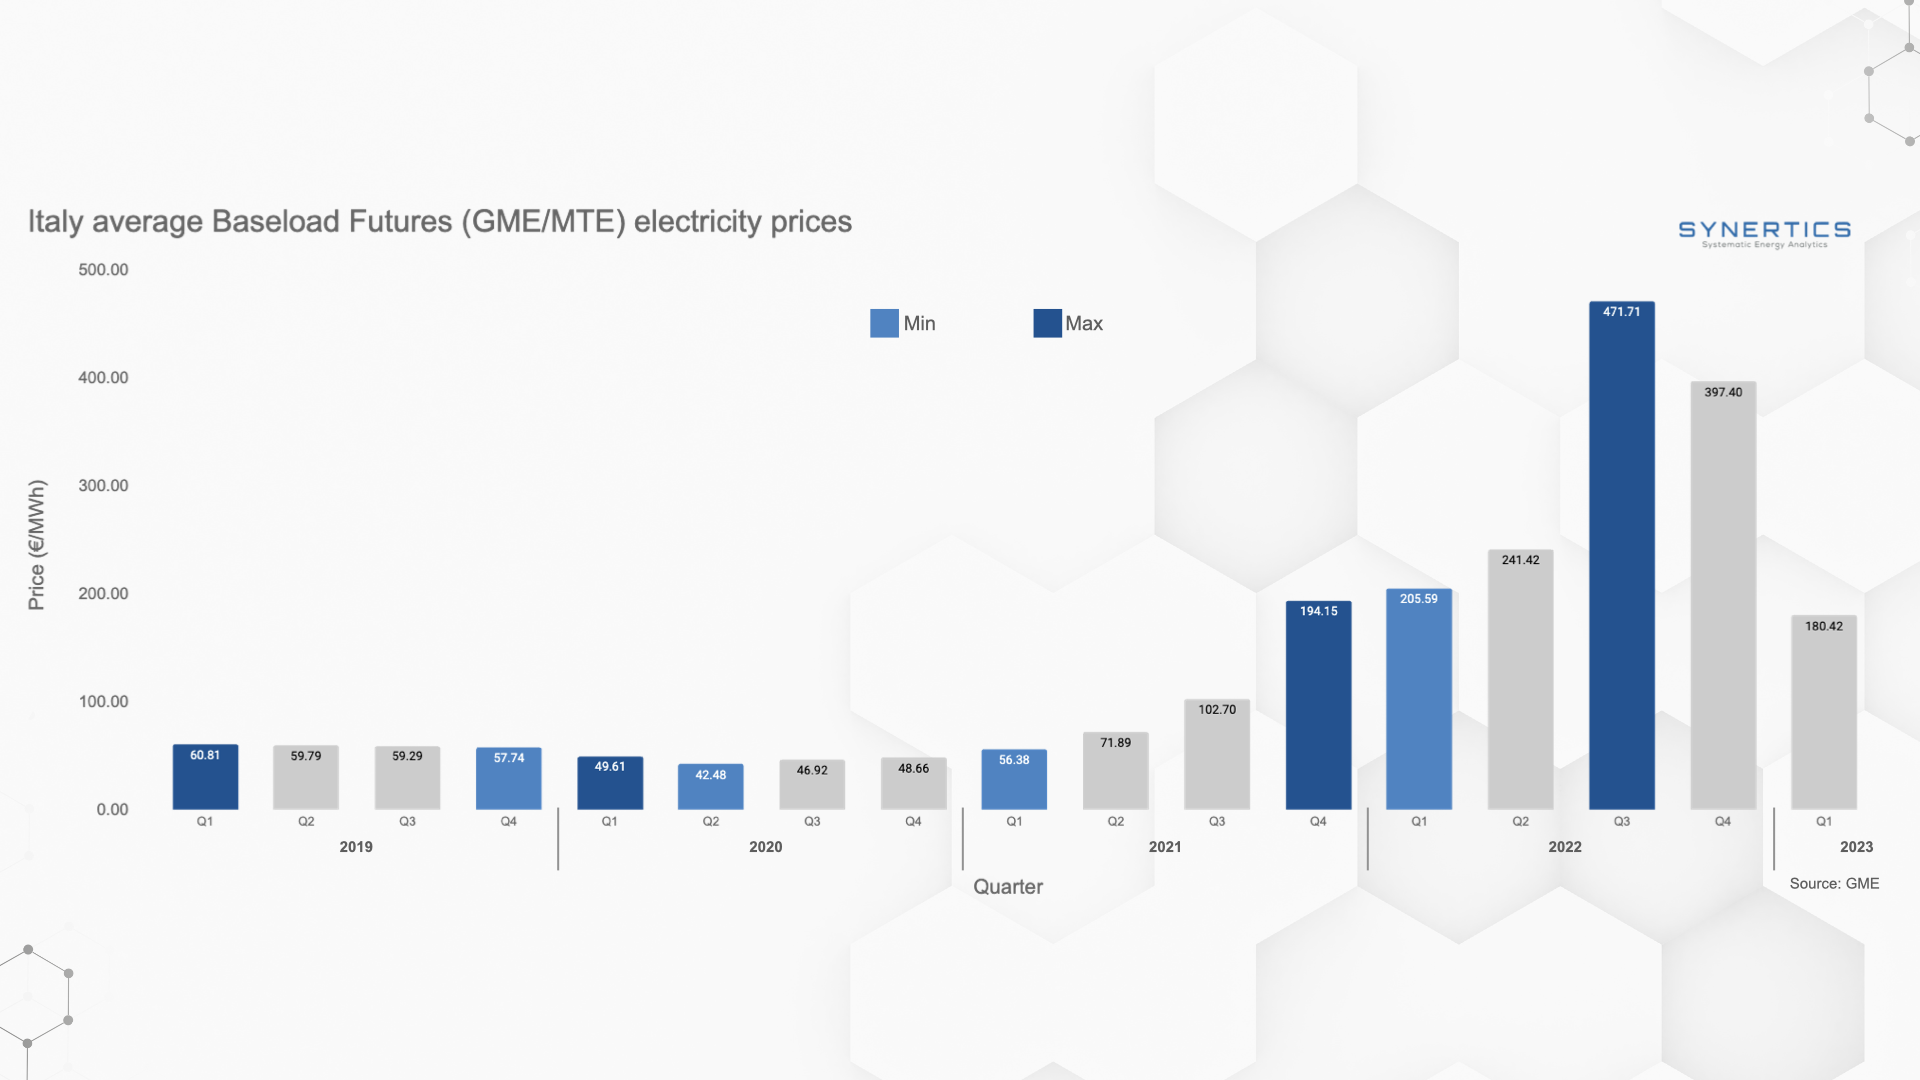 Bar chart showing the evolution of baseload electricity prices in Italy from 2019 to 2023